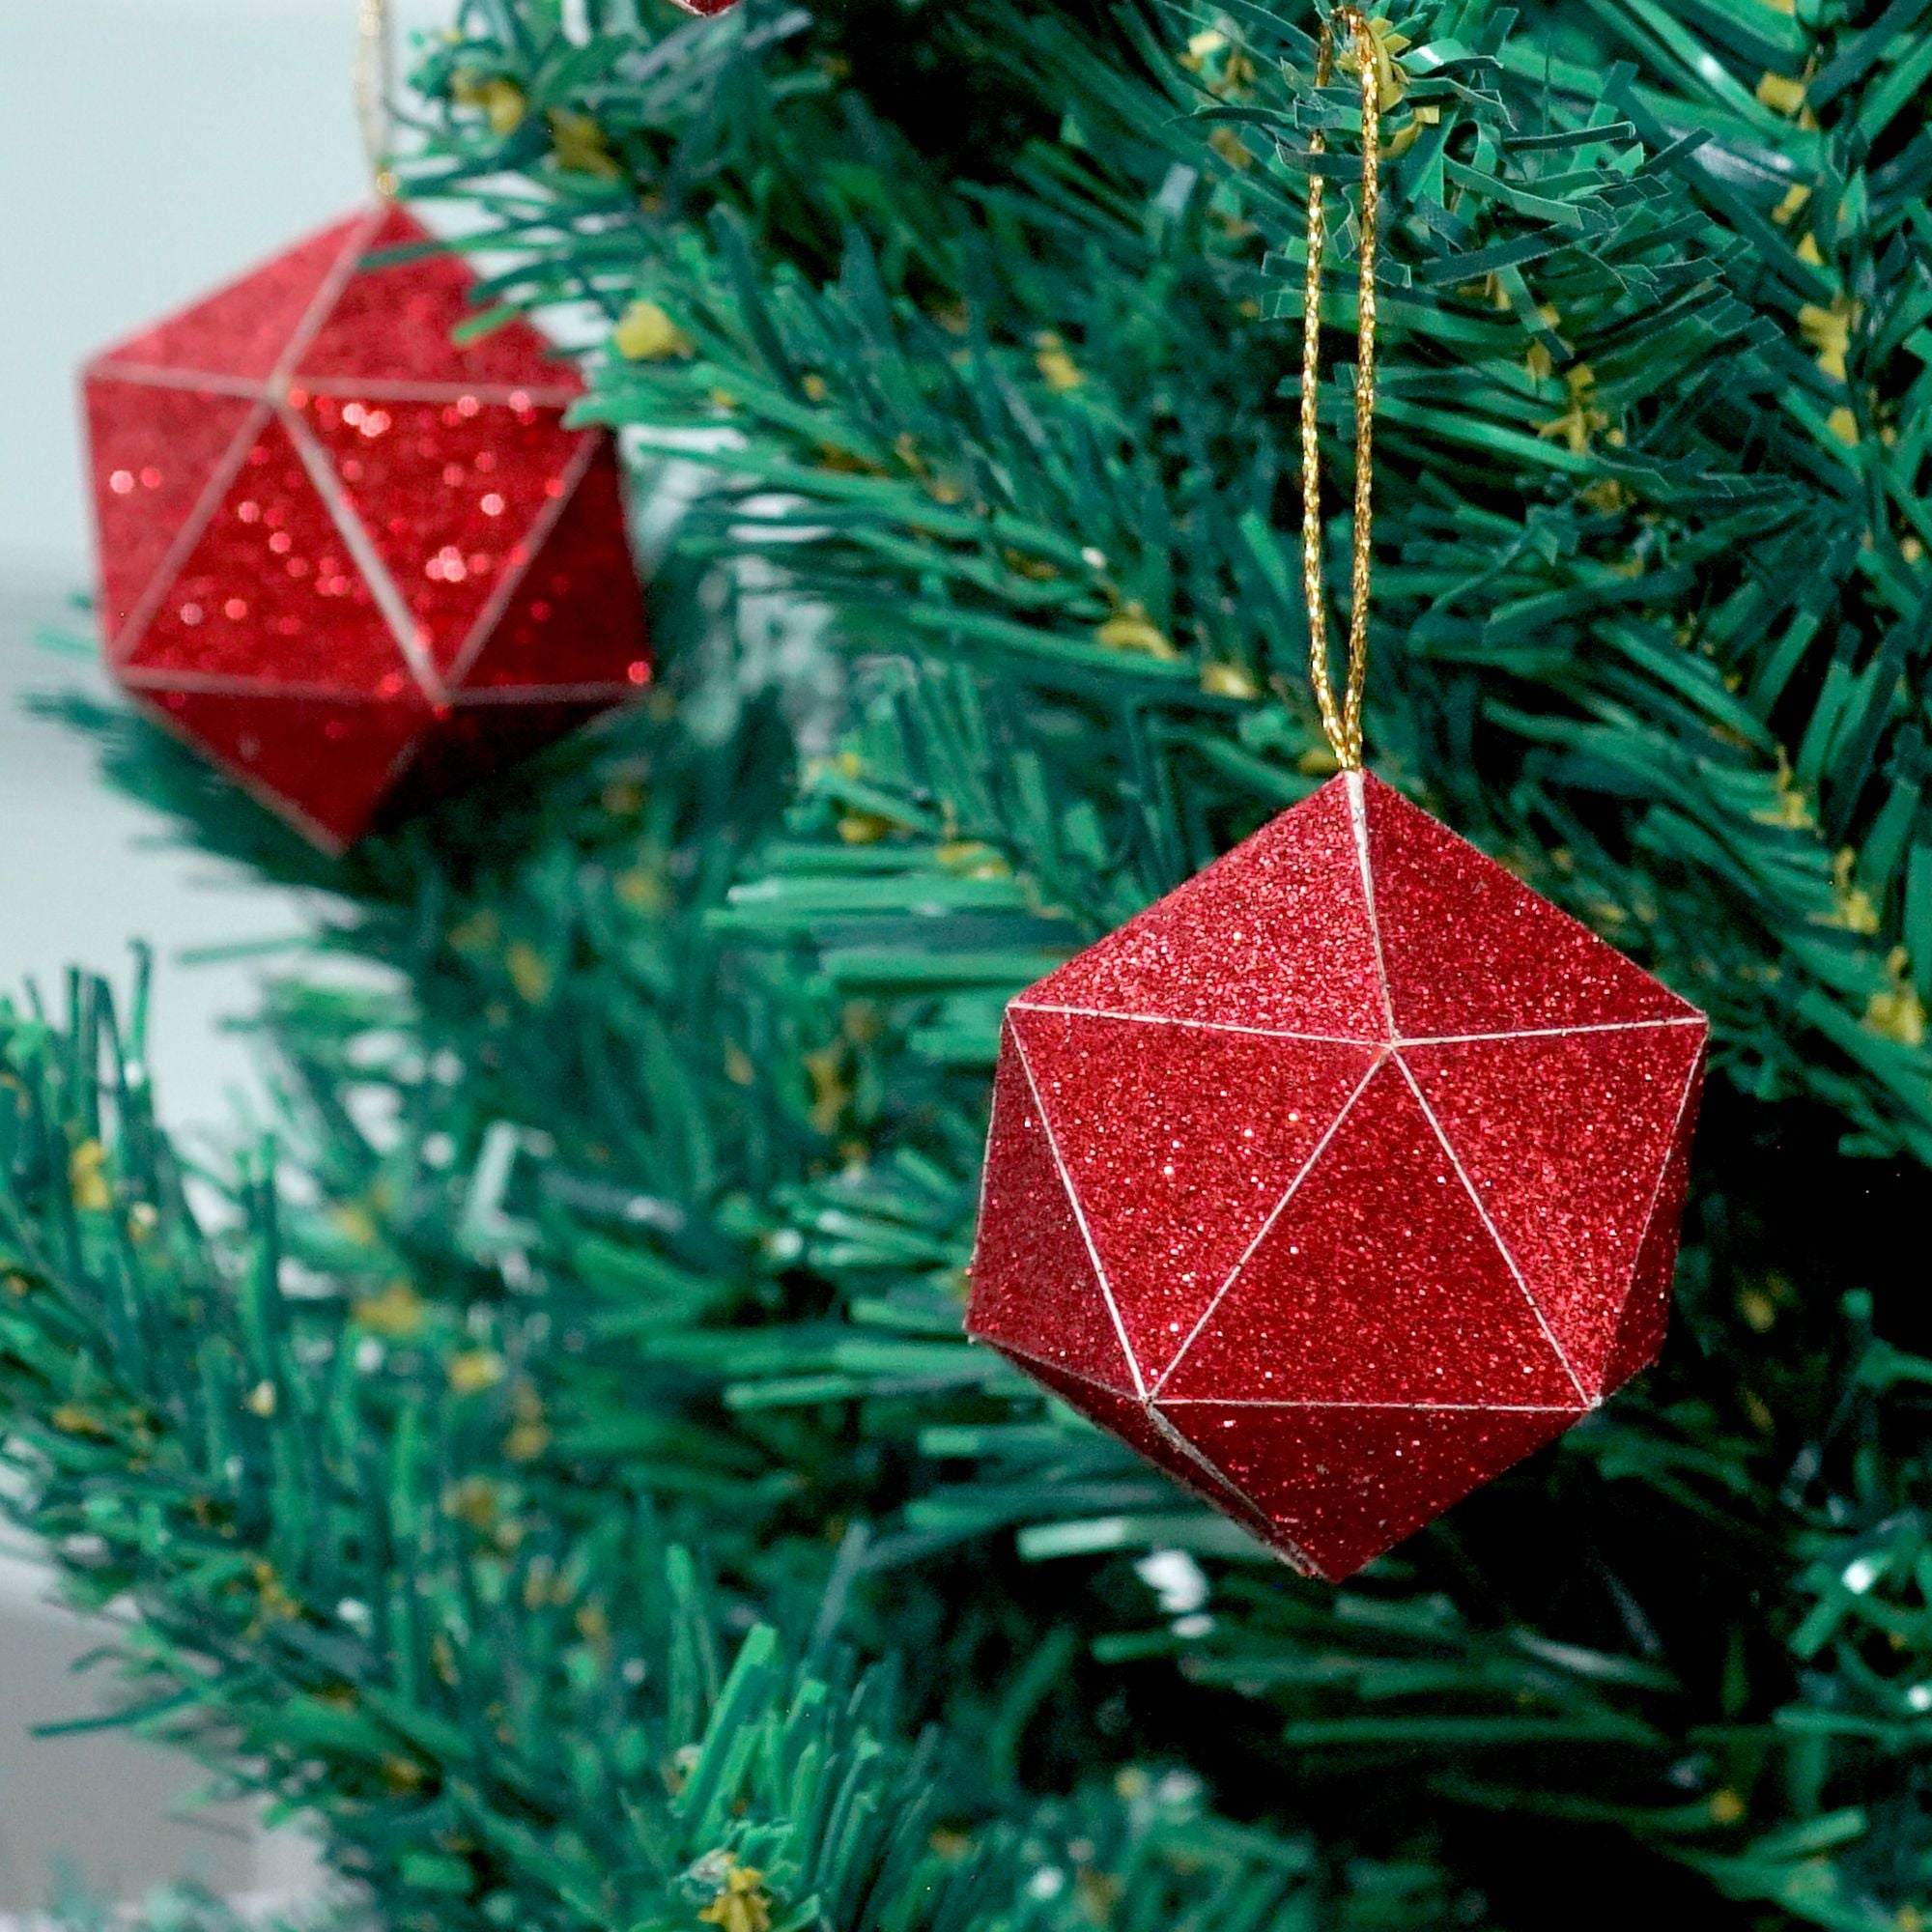 Handmade Christmas Trapezoid Hanging Glitter Ornaments, 60mm, Red, 6pc